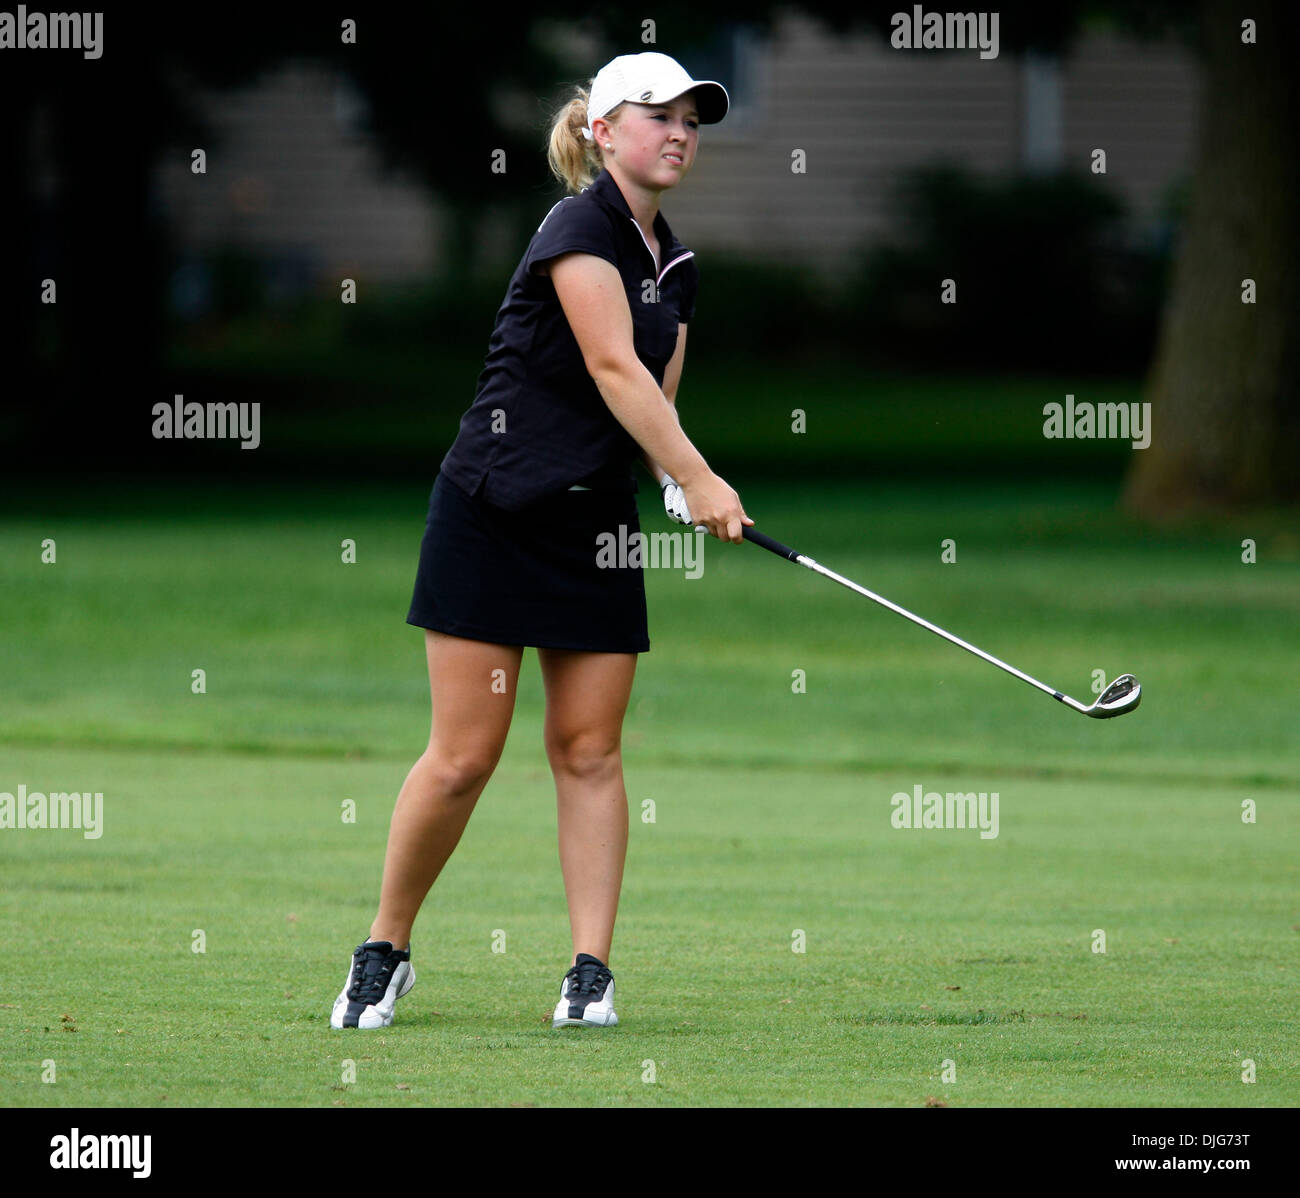 Jul 13, 2010 - Granger, Indiana, U.S. - MEGHAN MCDOUGALL, of Markham, Ontario, Canada, watches the flight of her approach shot on the back nine Tuesday during the Women's Western Golf Association 84th National Junior Championship at Knollwood Country Club. McDougall finished tied for 16th in the two day qualifying round with a score of 153 and advances to the championship flight of Stock Photo